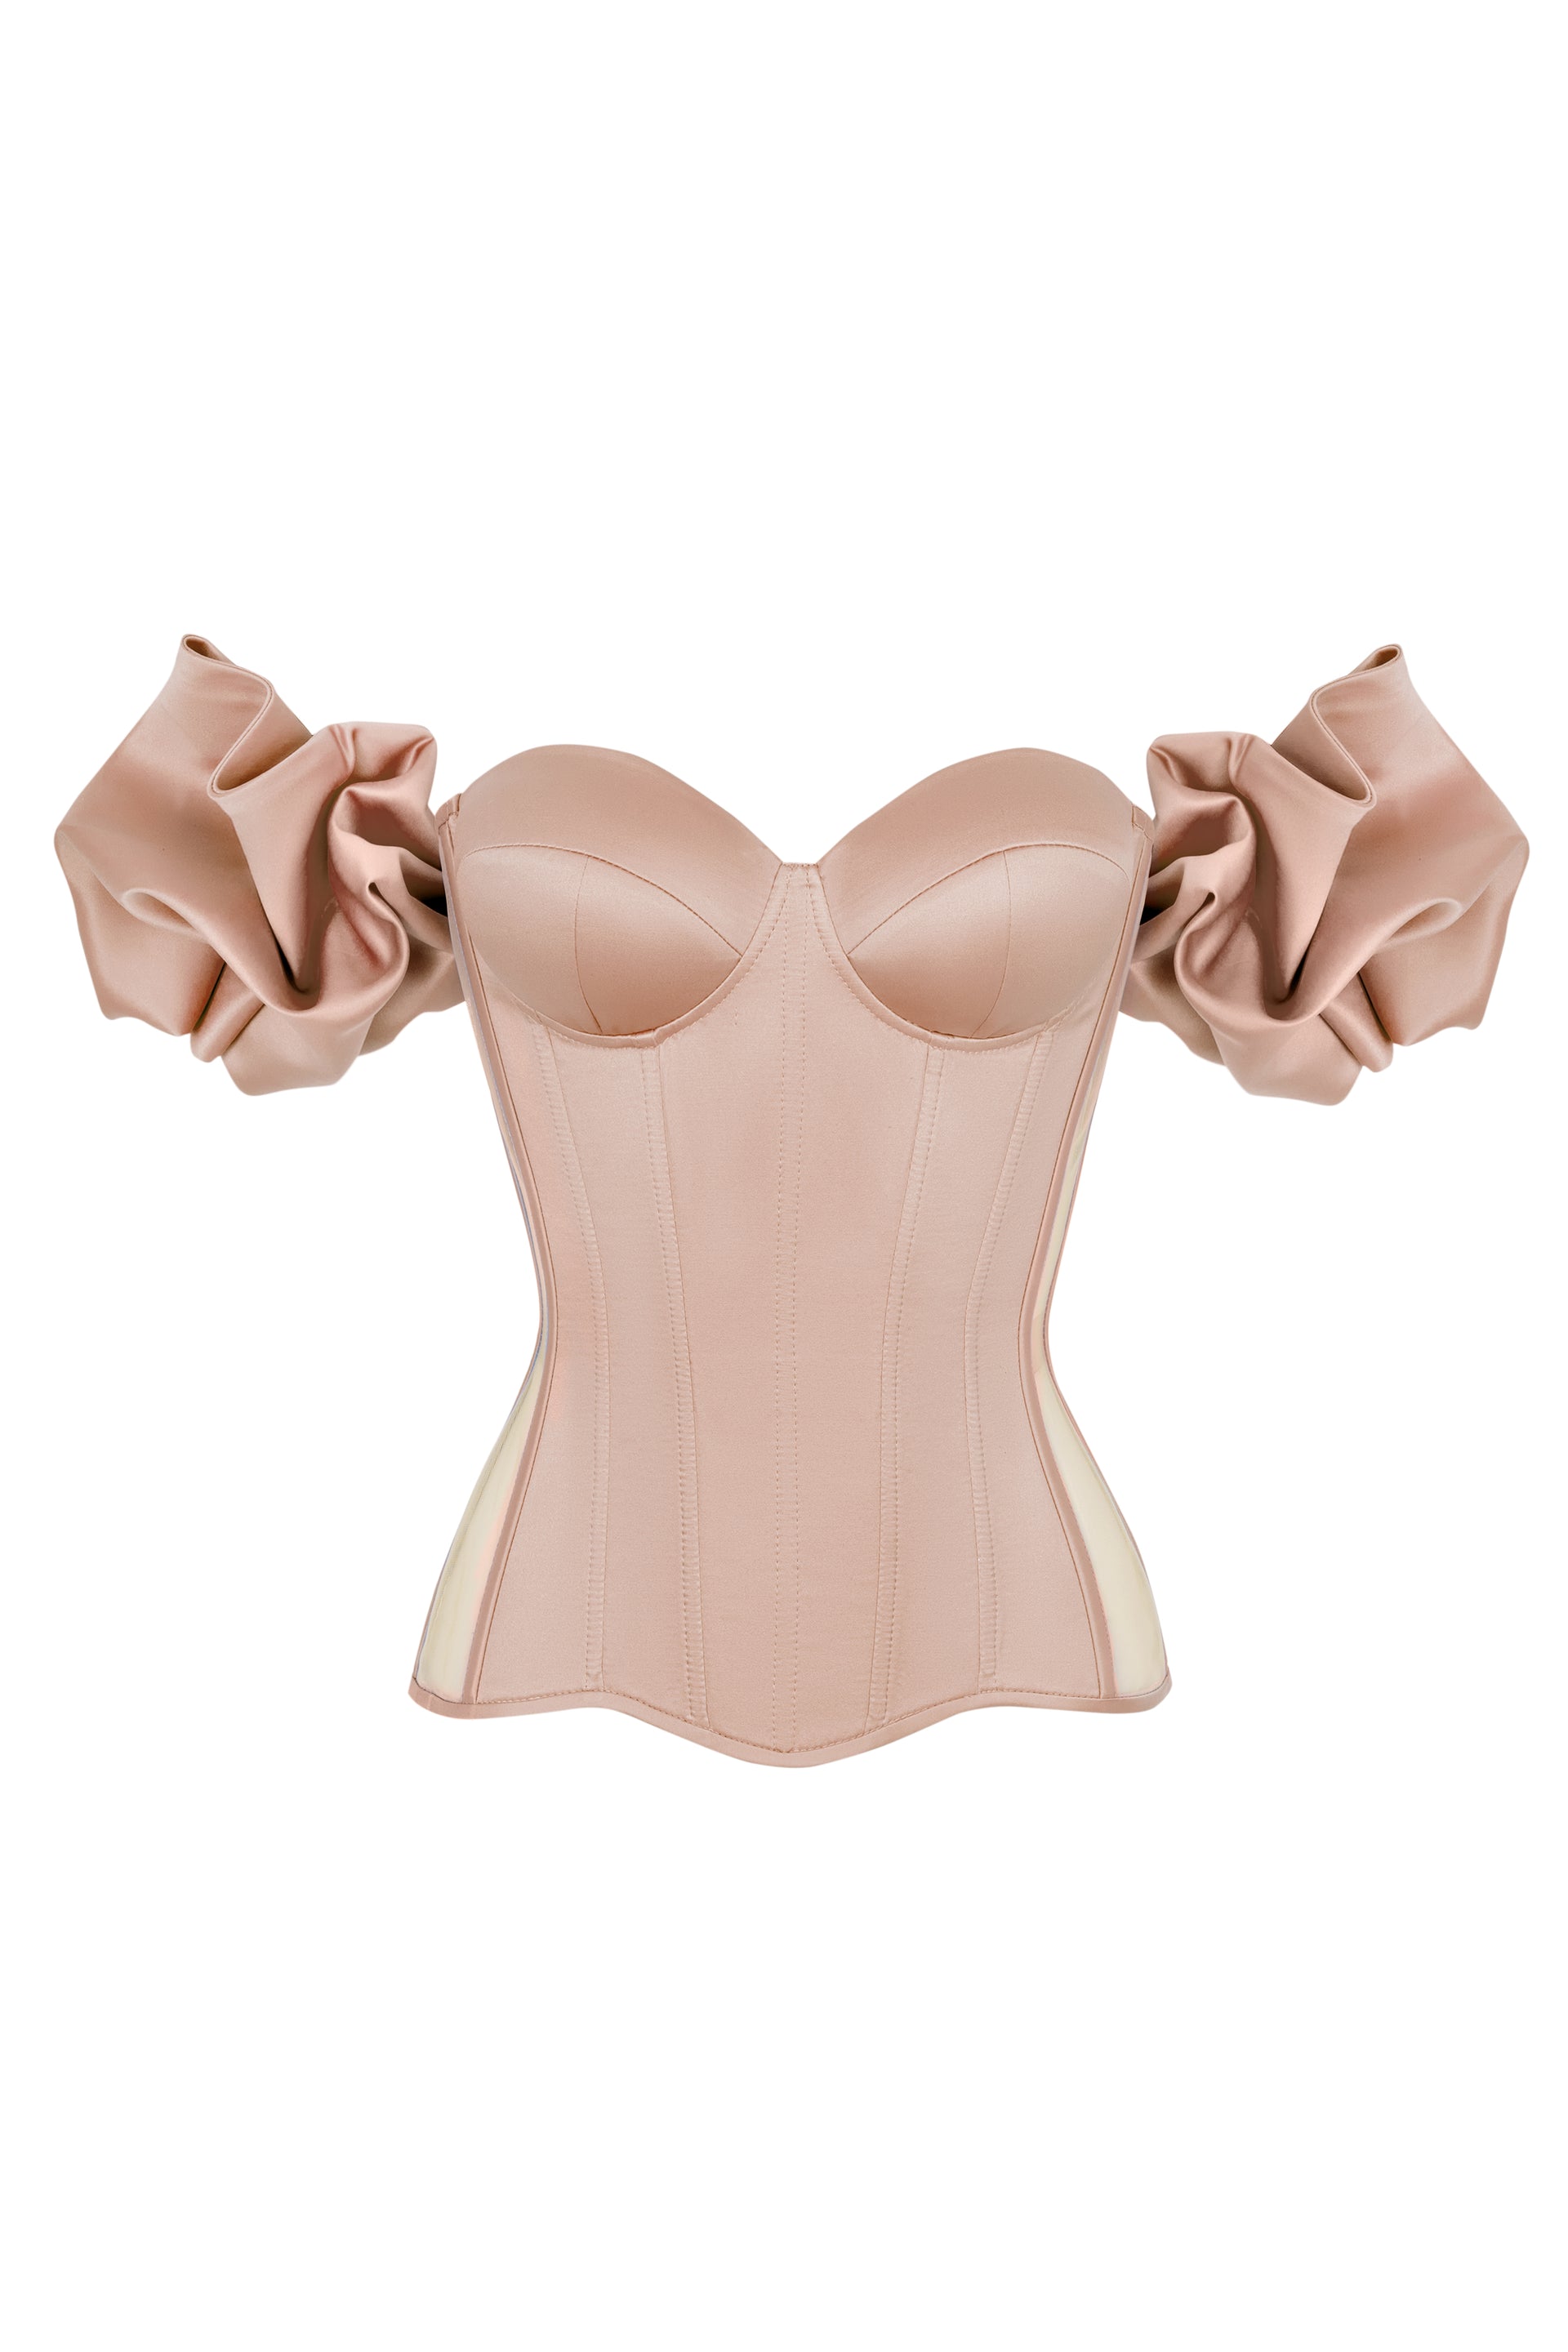 Beige satin corset with transparent back and detachable sleeves